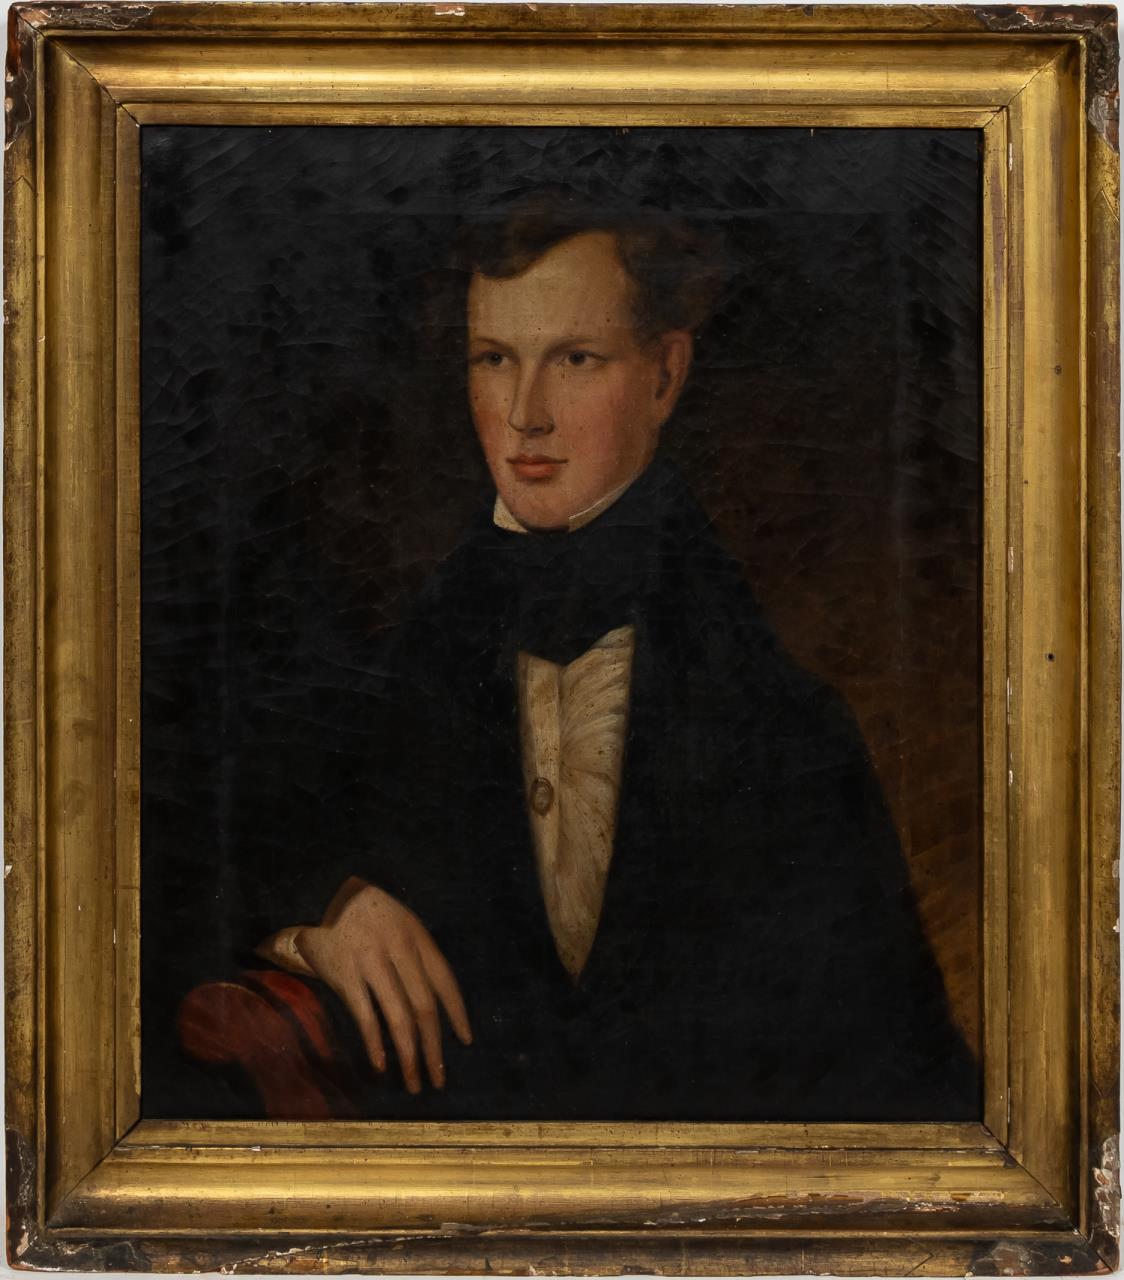 GEORGE COOKE, PORTRAIT OF A YOUNG